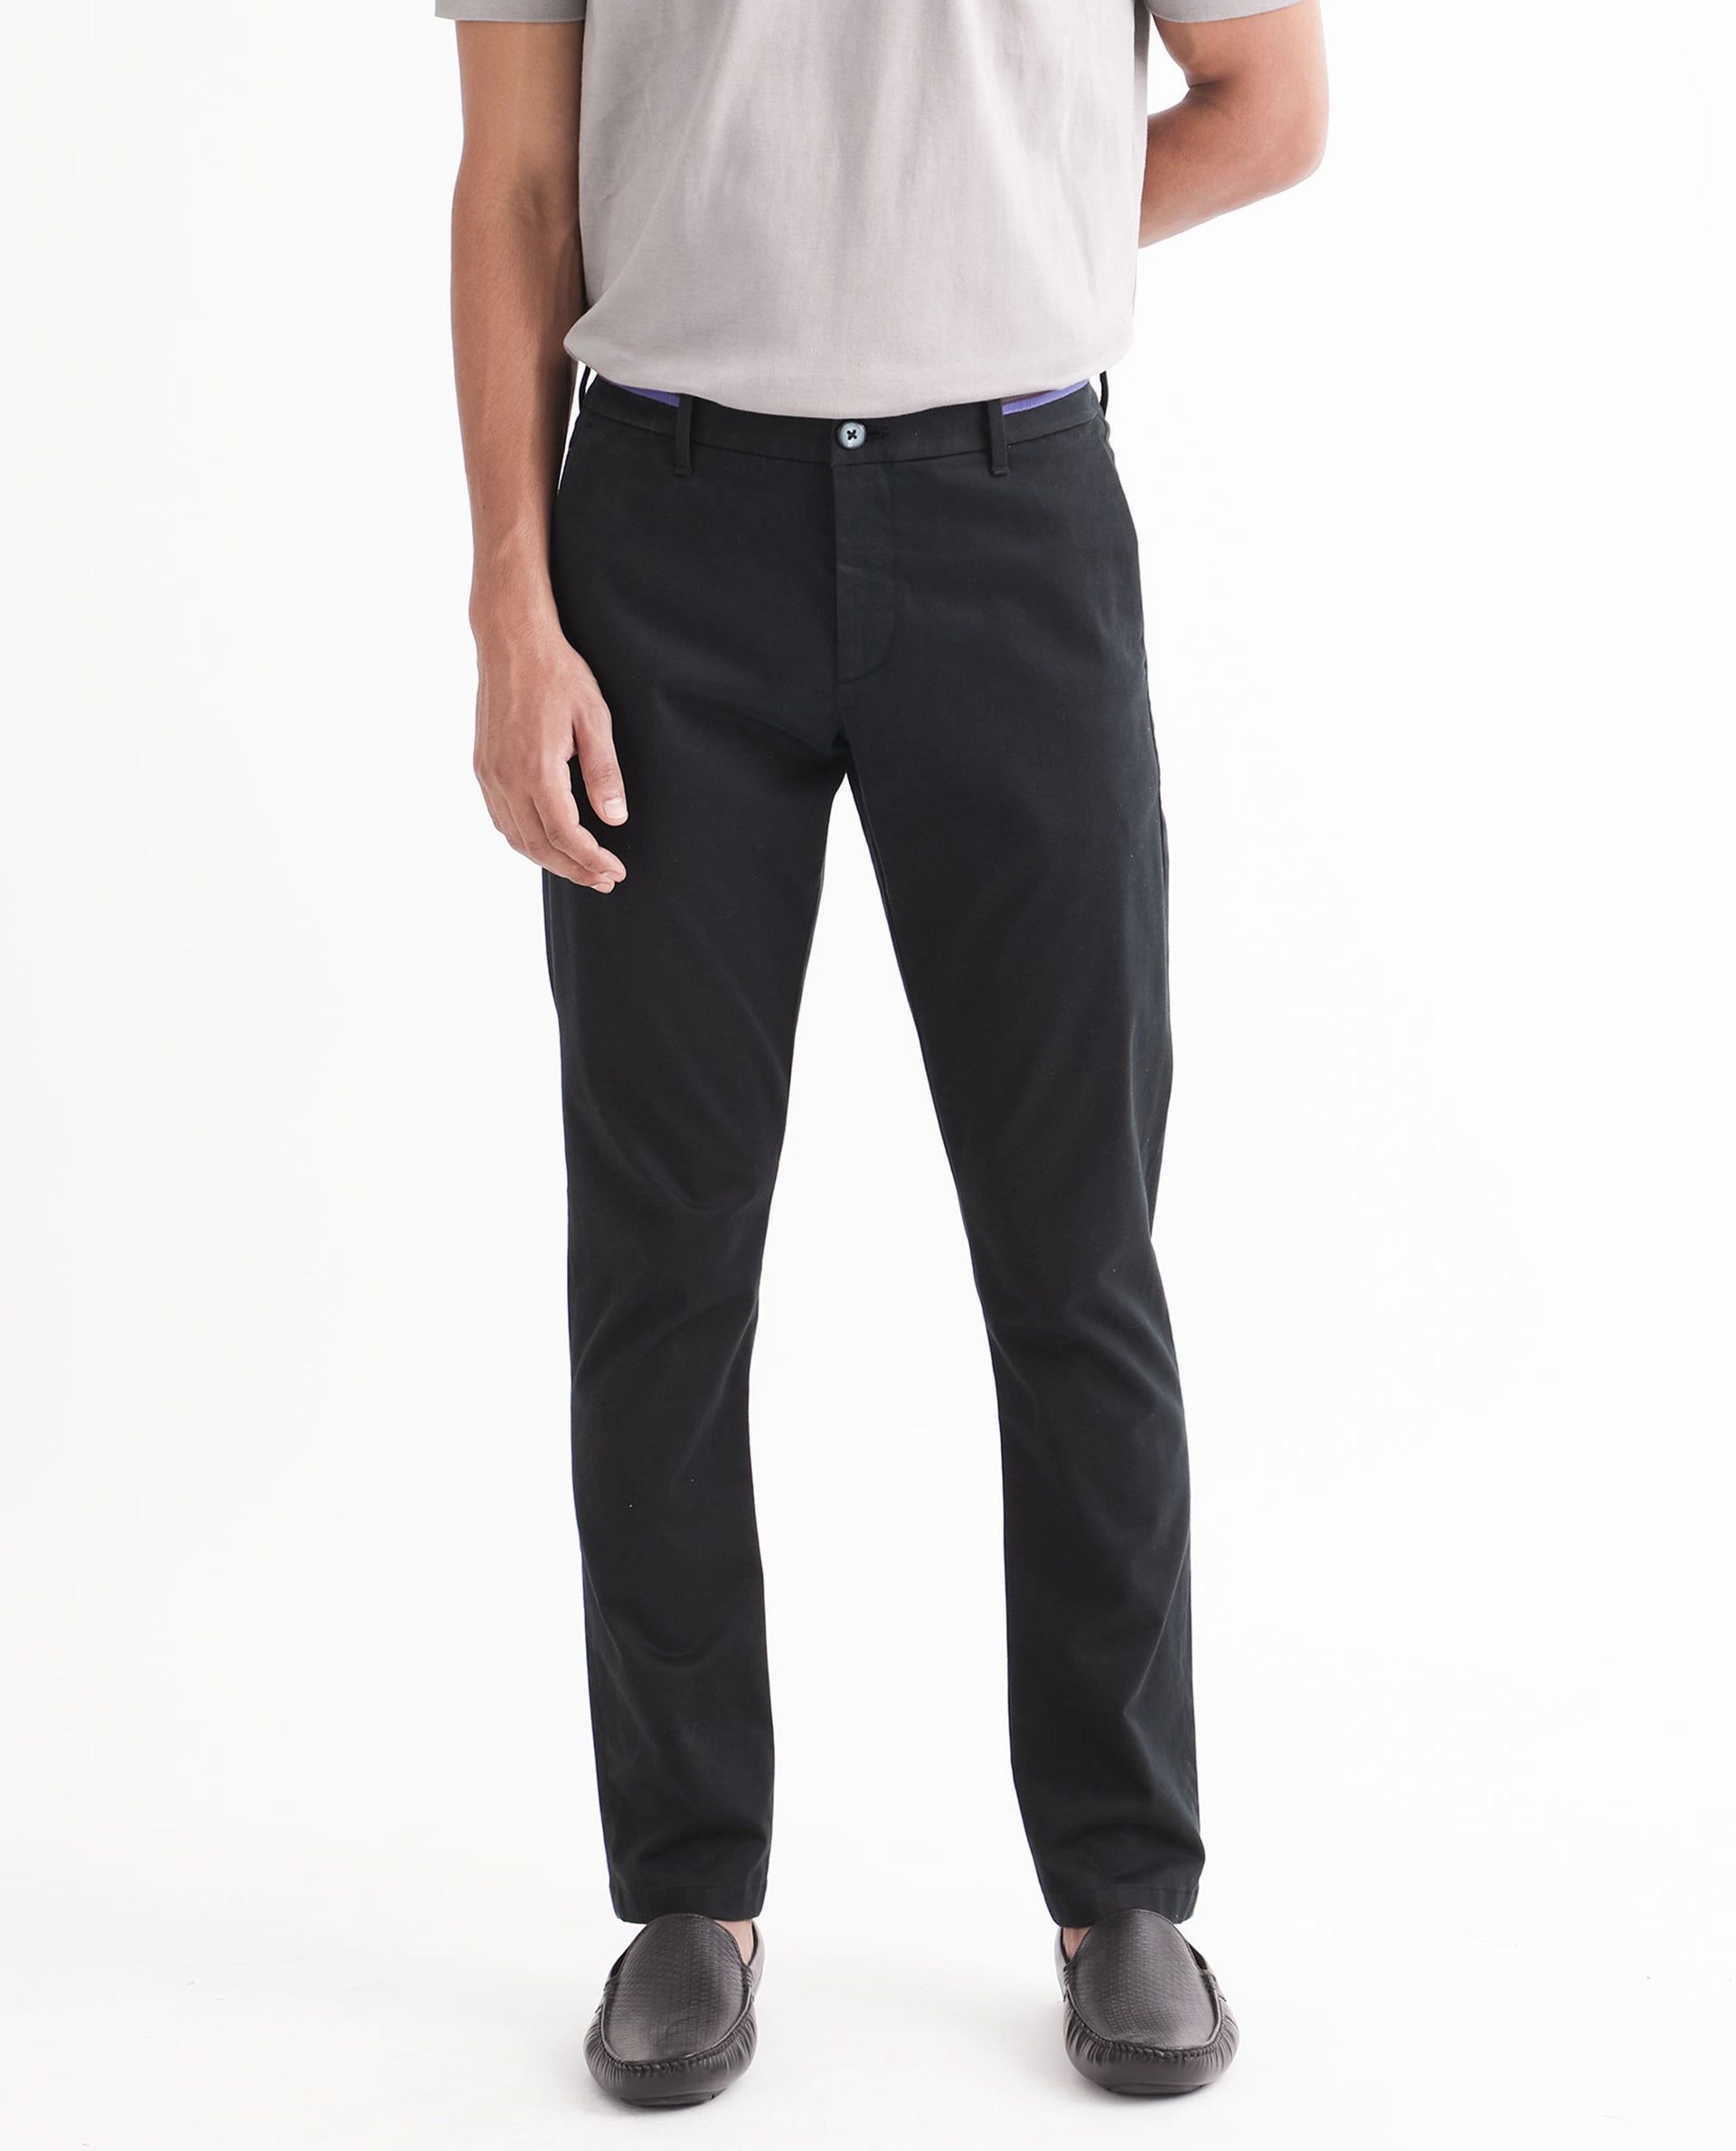 Off-White Belted Sortino Pants in Cotton Stretch Moleskin | SUITSUPPLY US